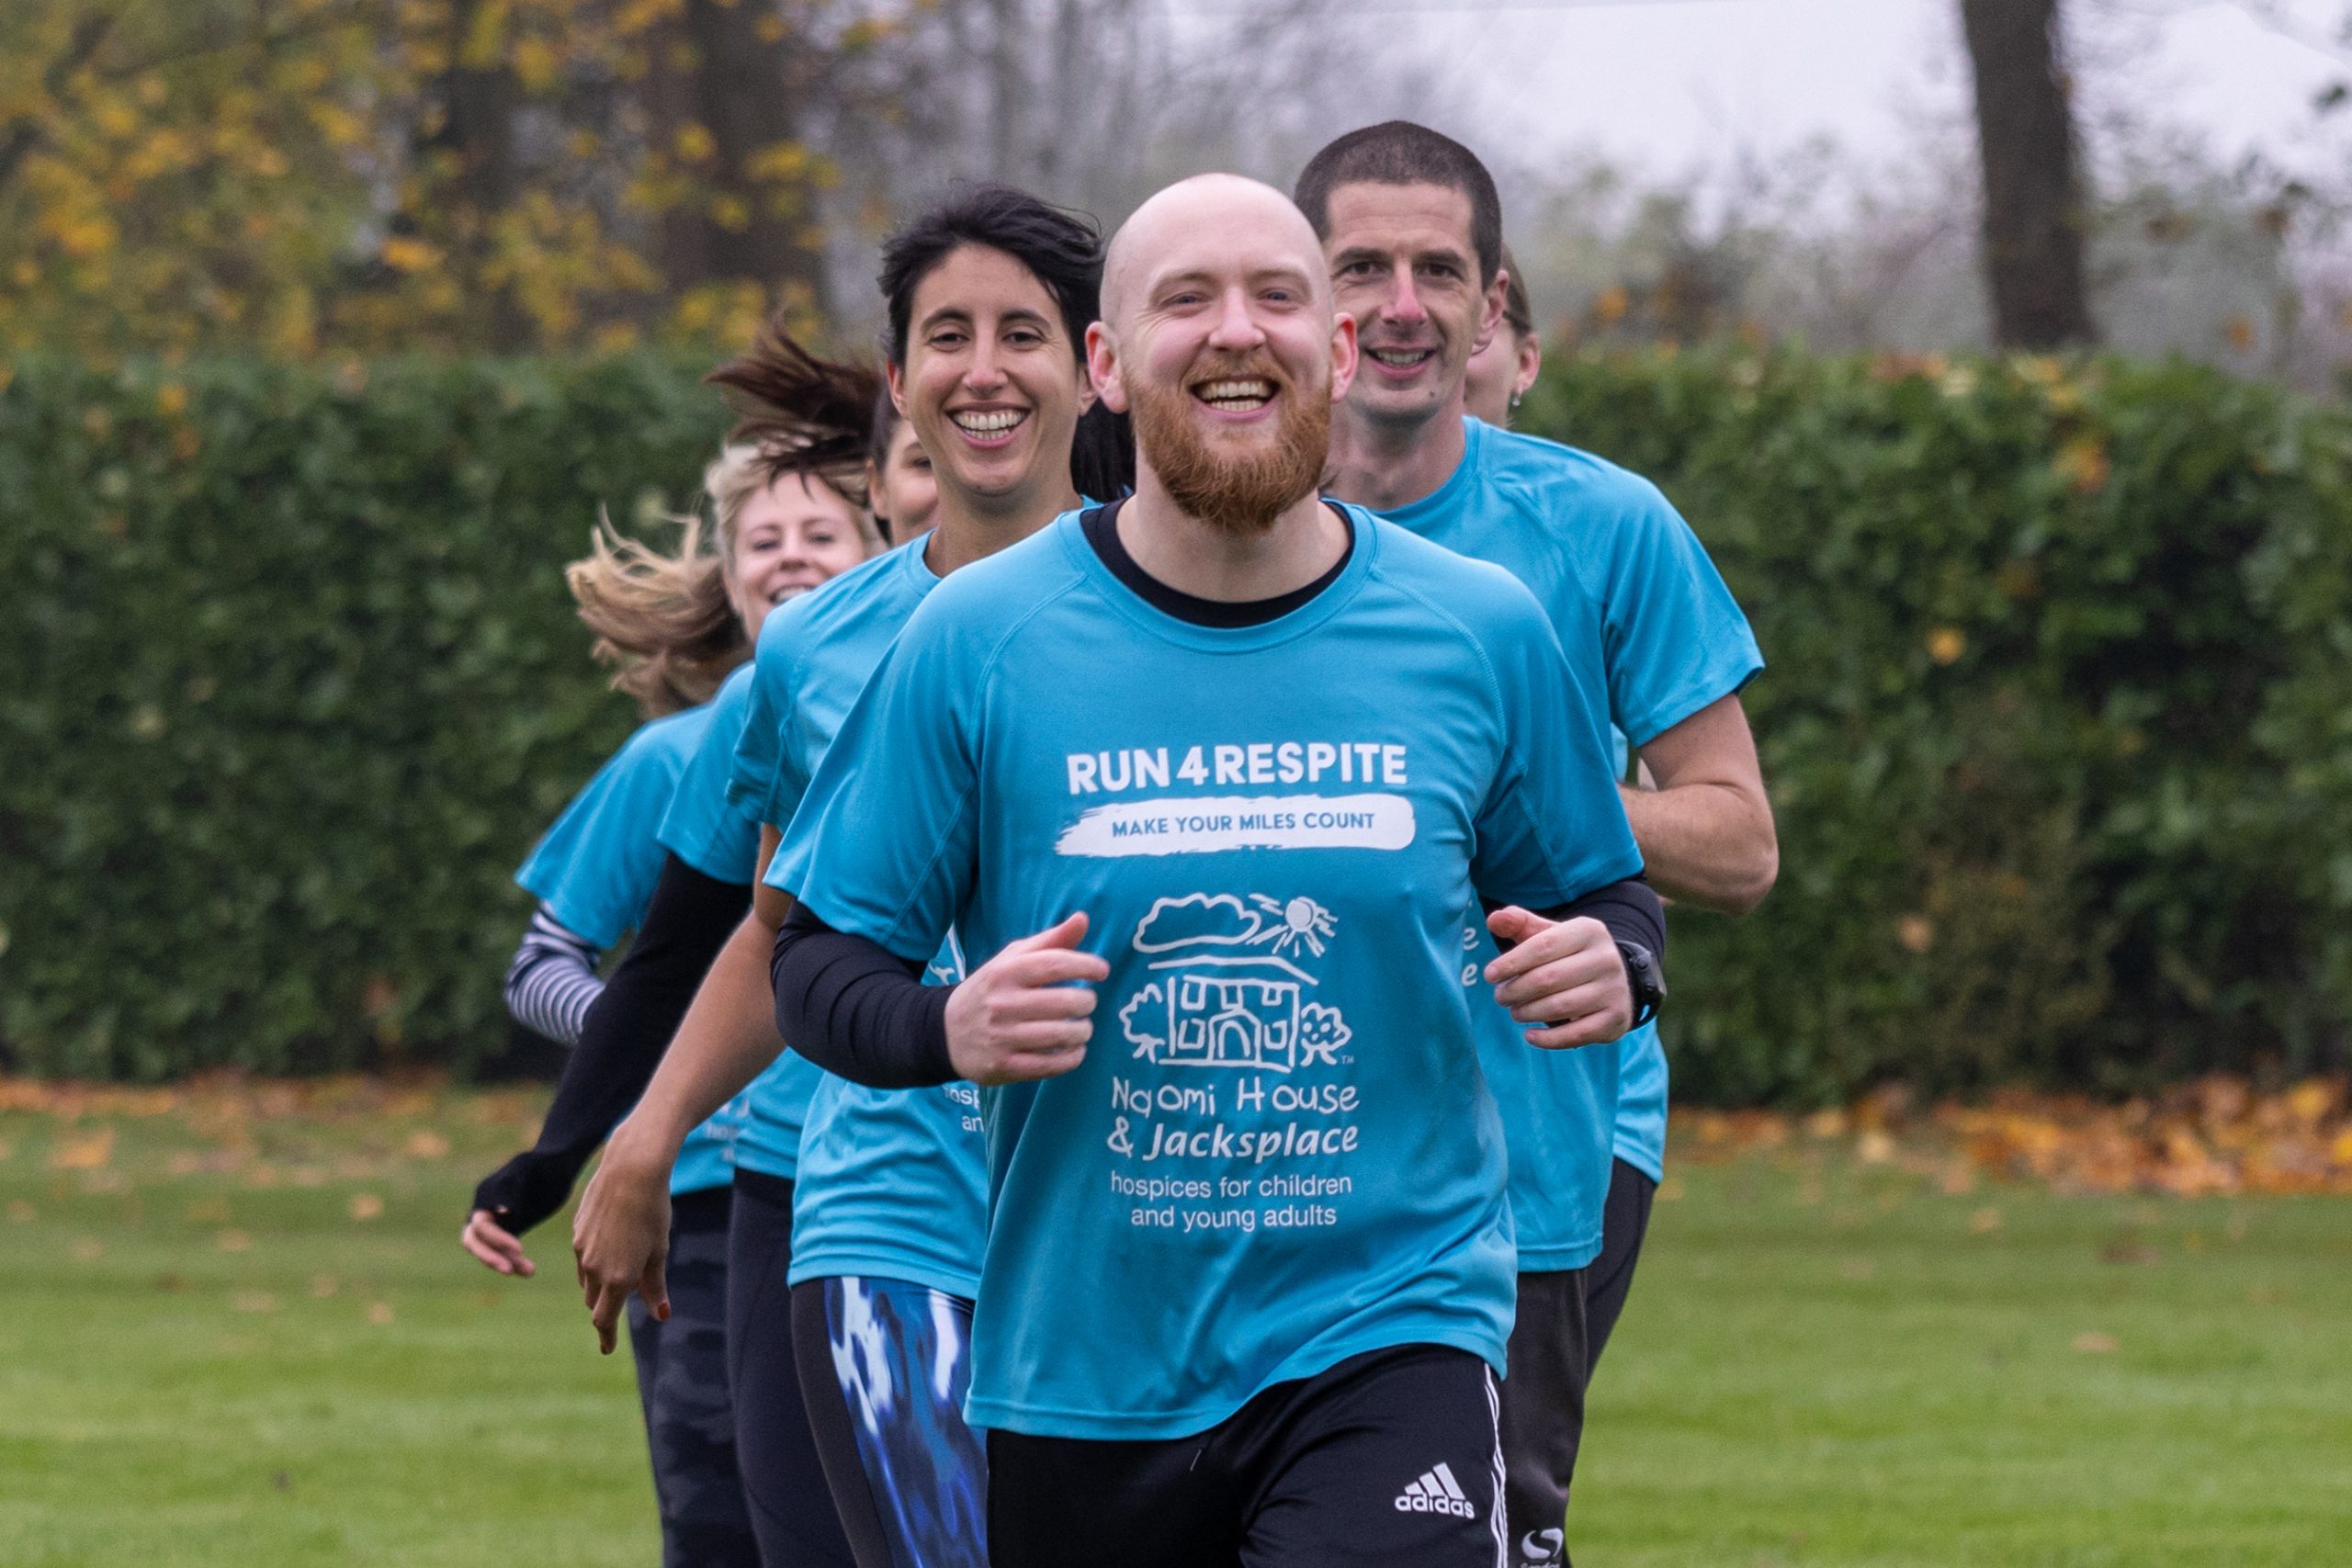 Run 105 miles during March to raise money for local hospices for children and young people